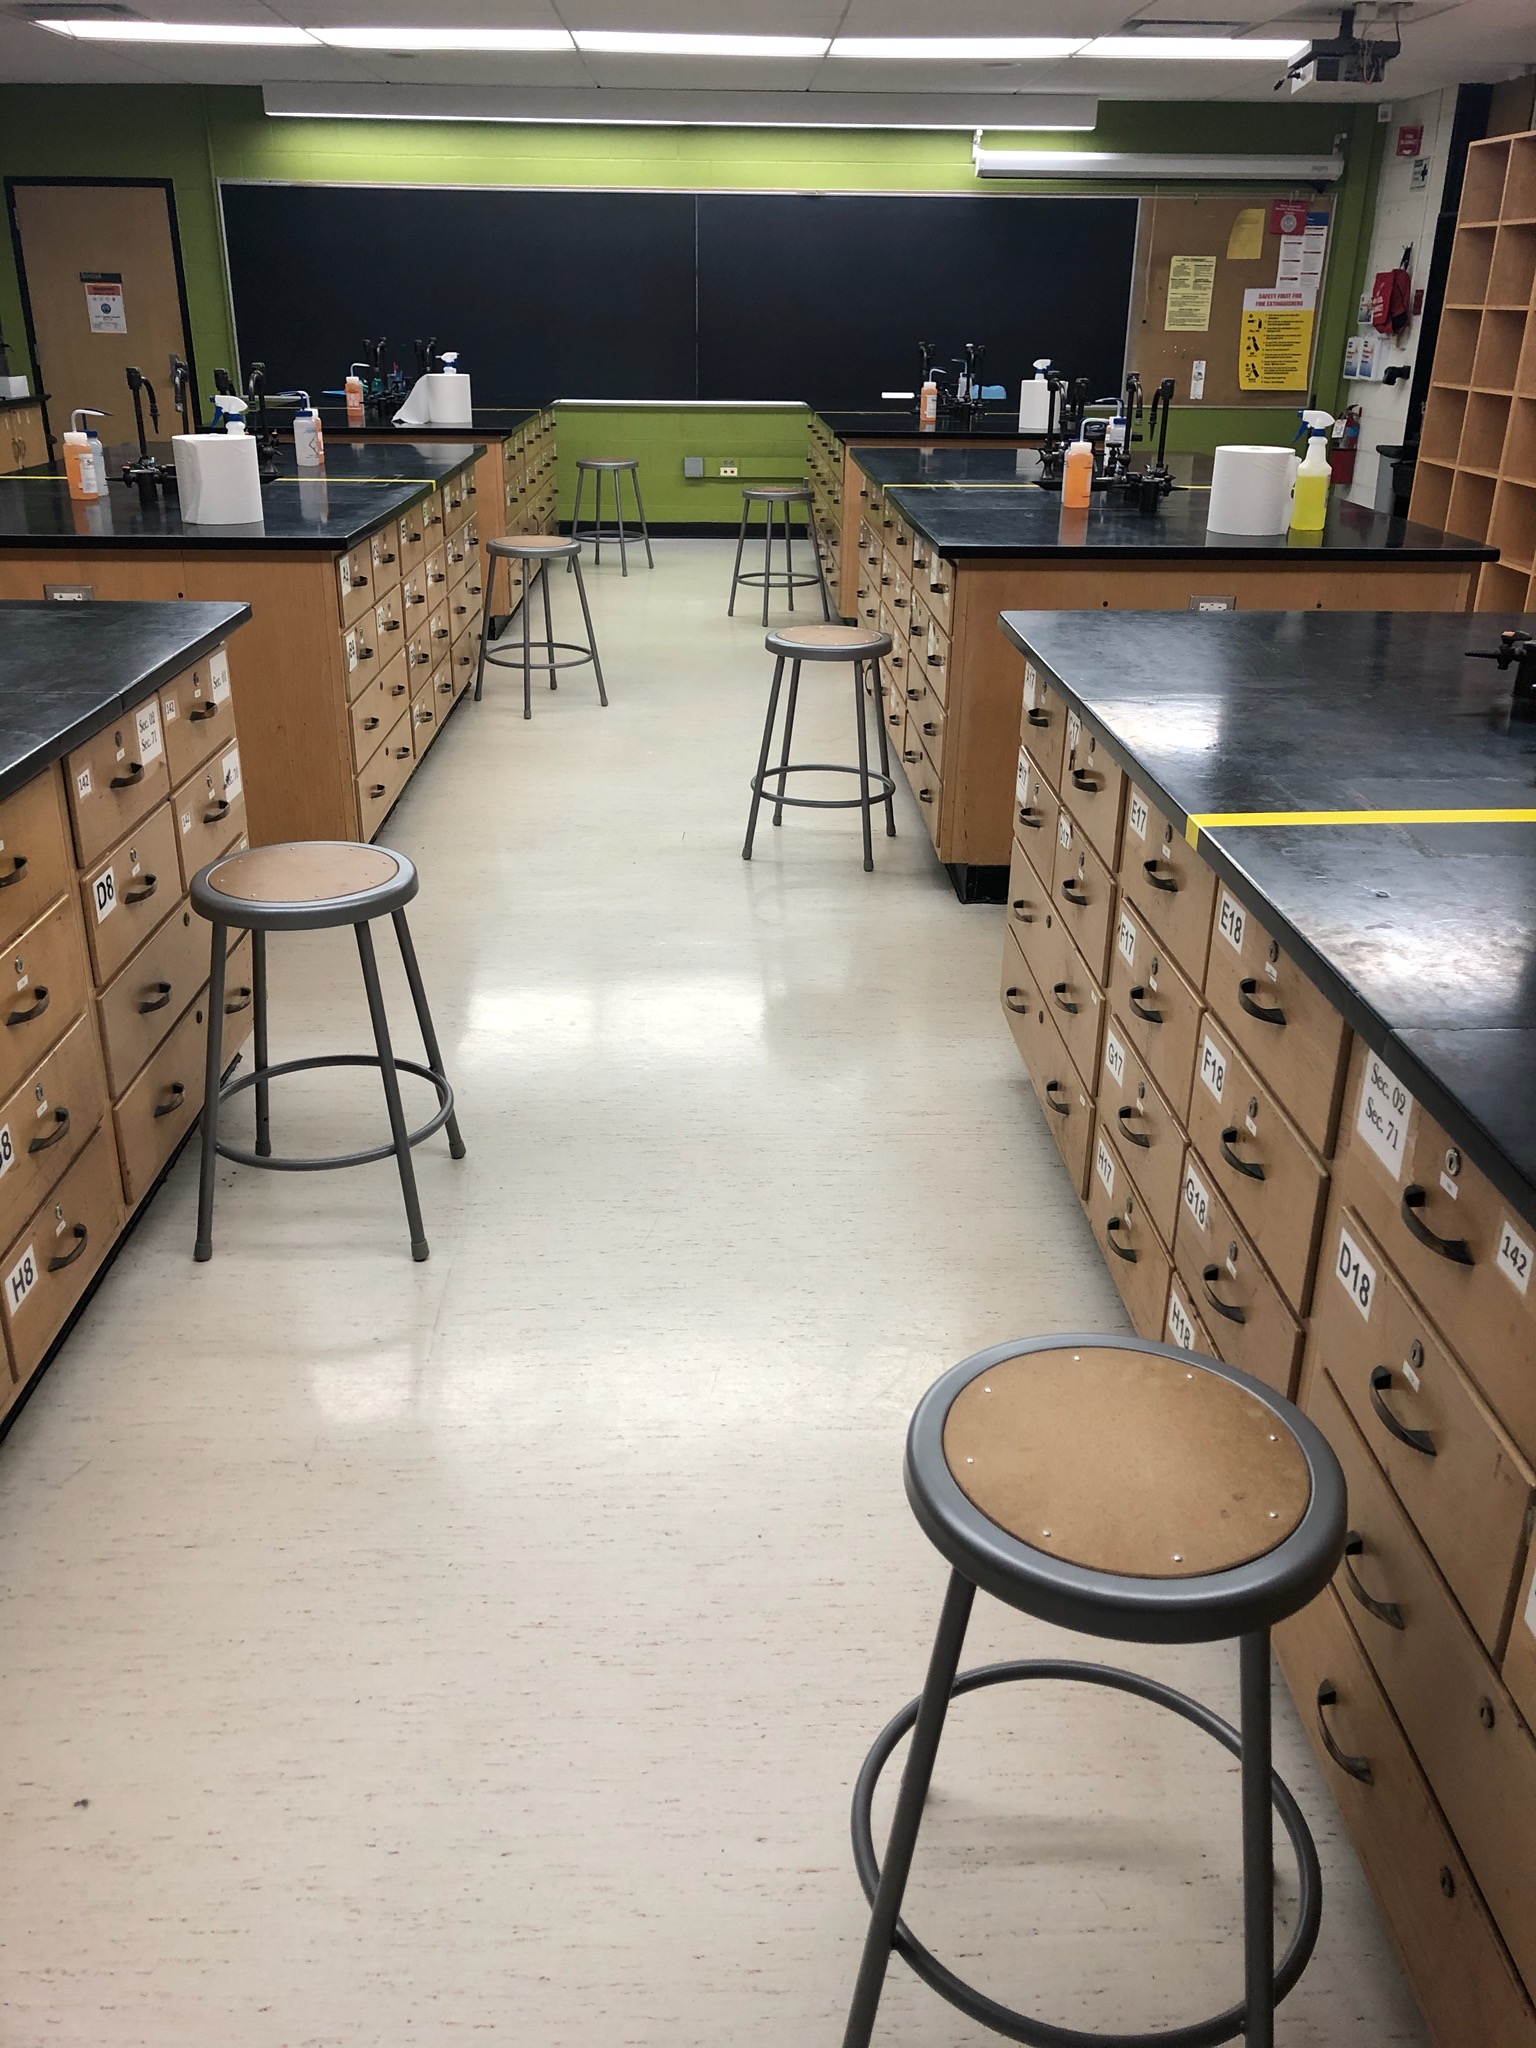 Spaced chair set-up in Inorganic Chemistry Lab to facilitate student social distancing. Photo taken by Ms. Alice Hull